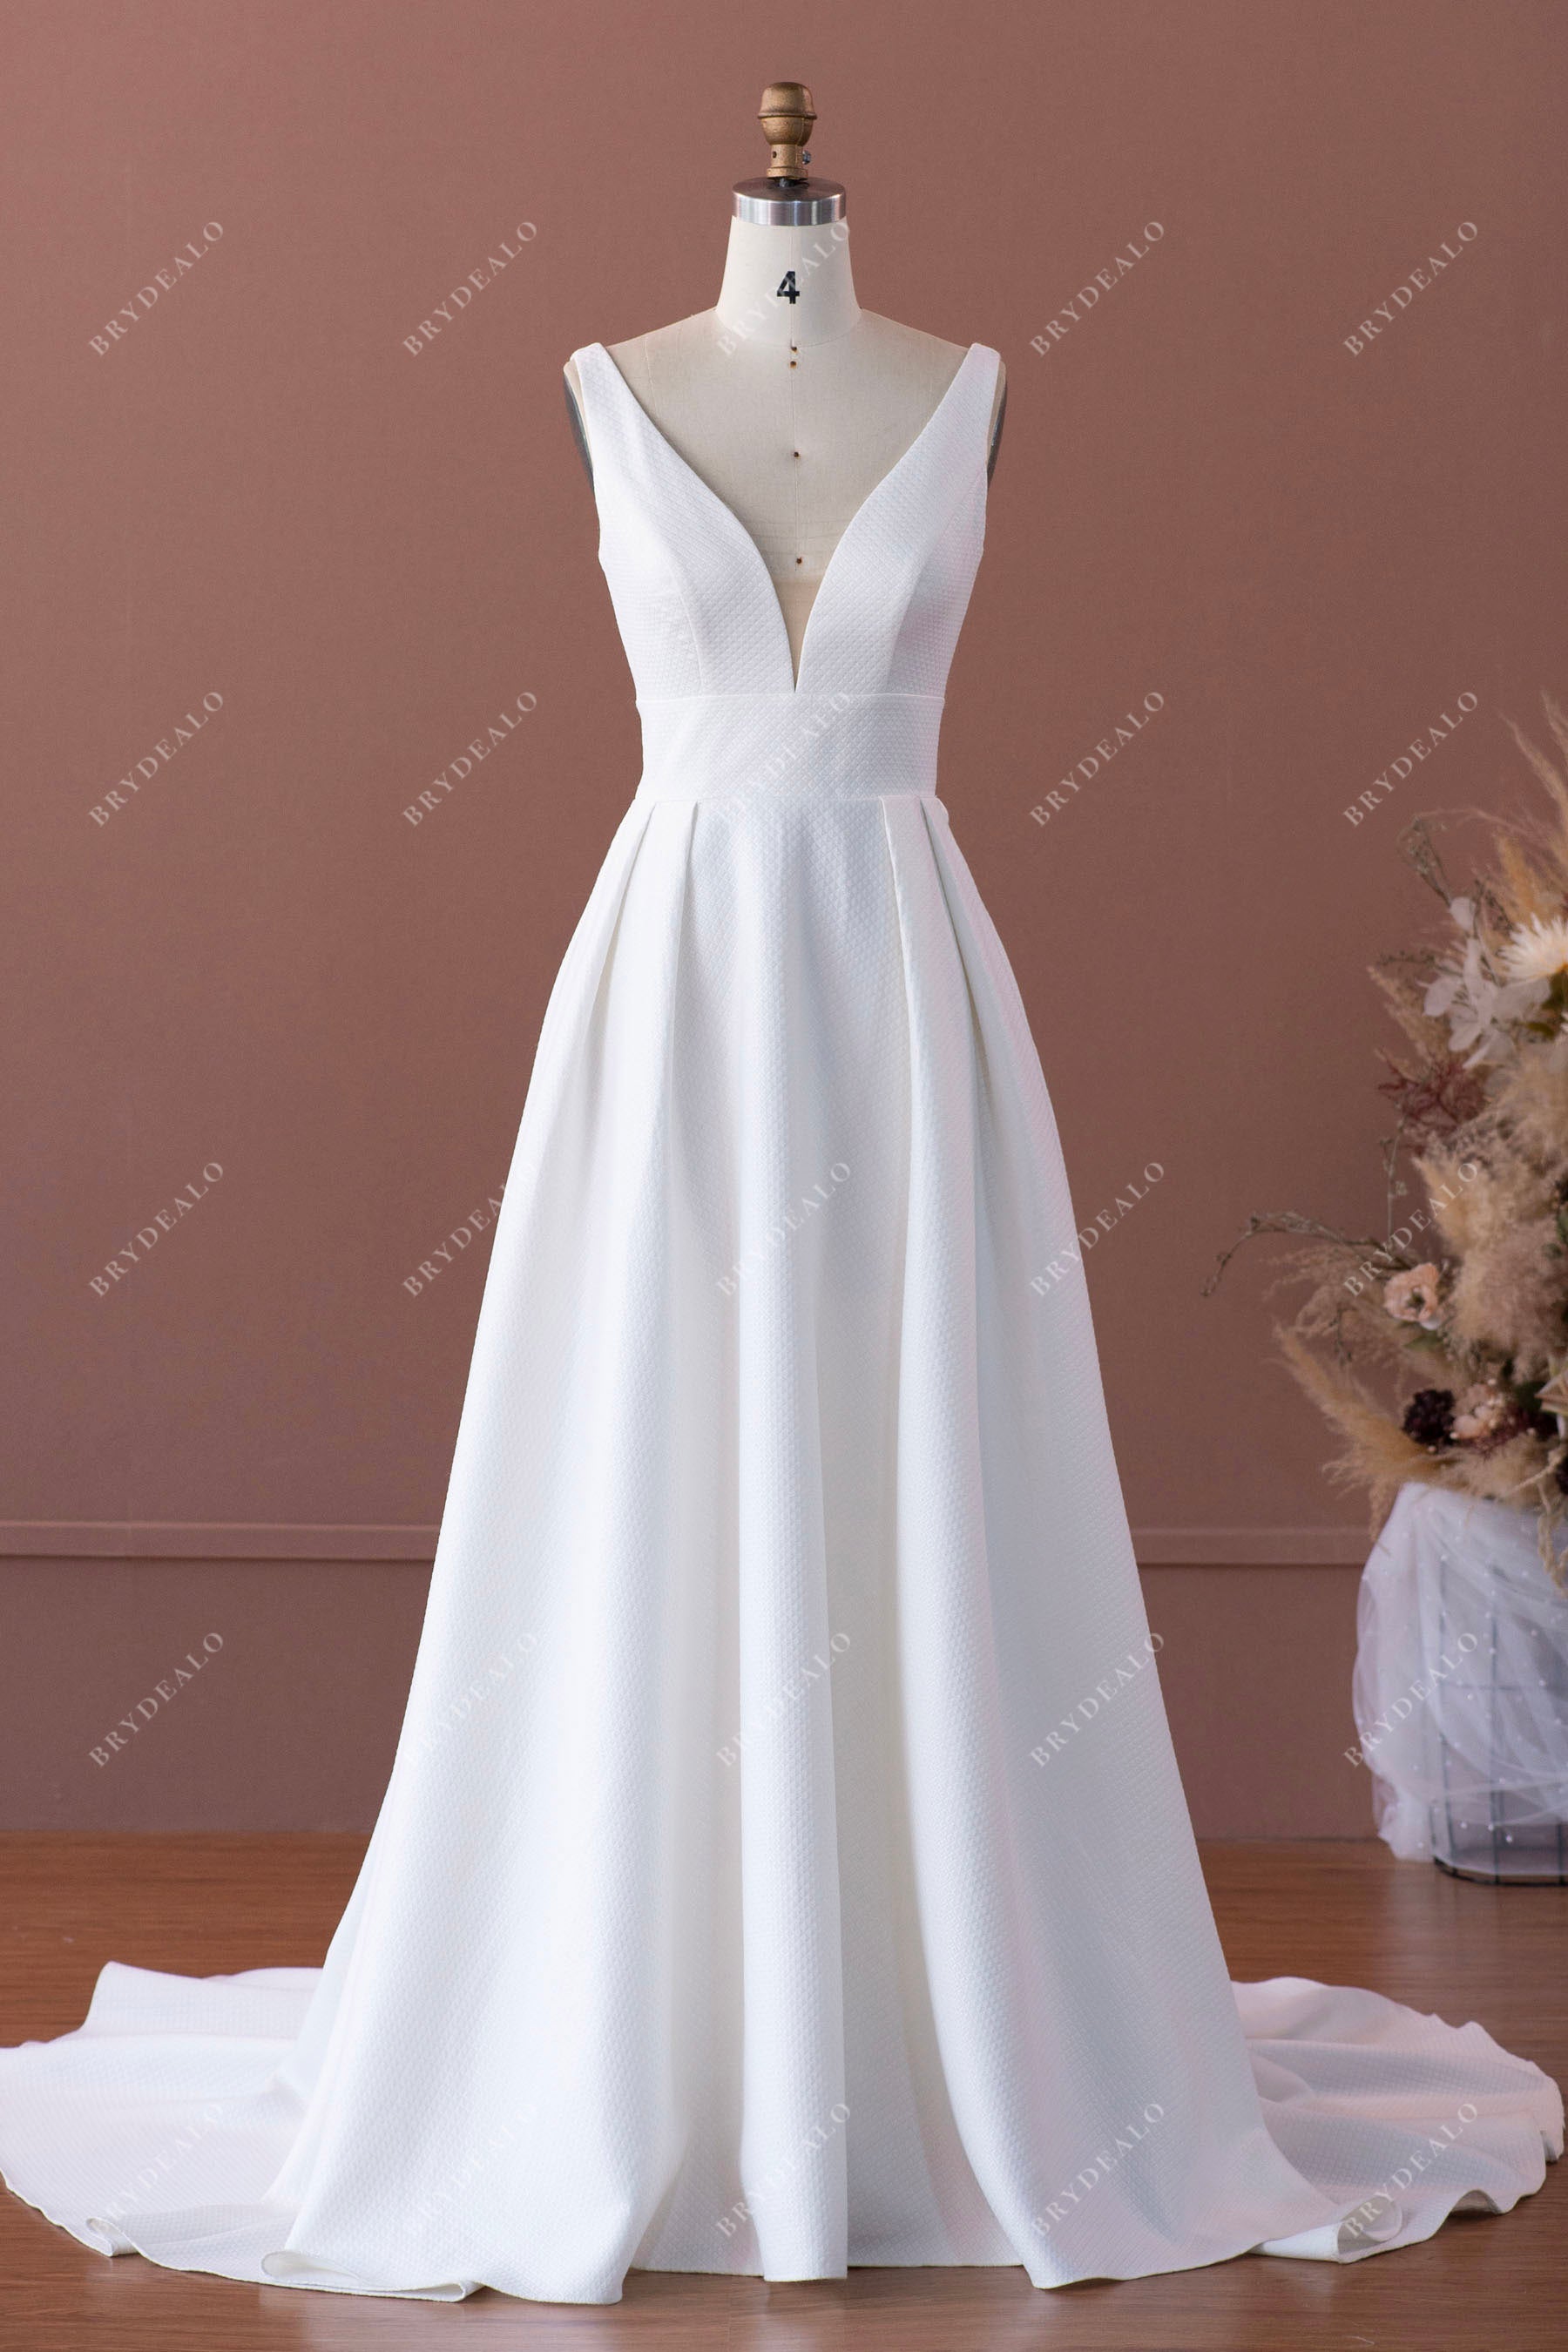 simple straps plunging A-line wedding dress sample